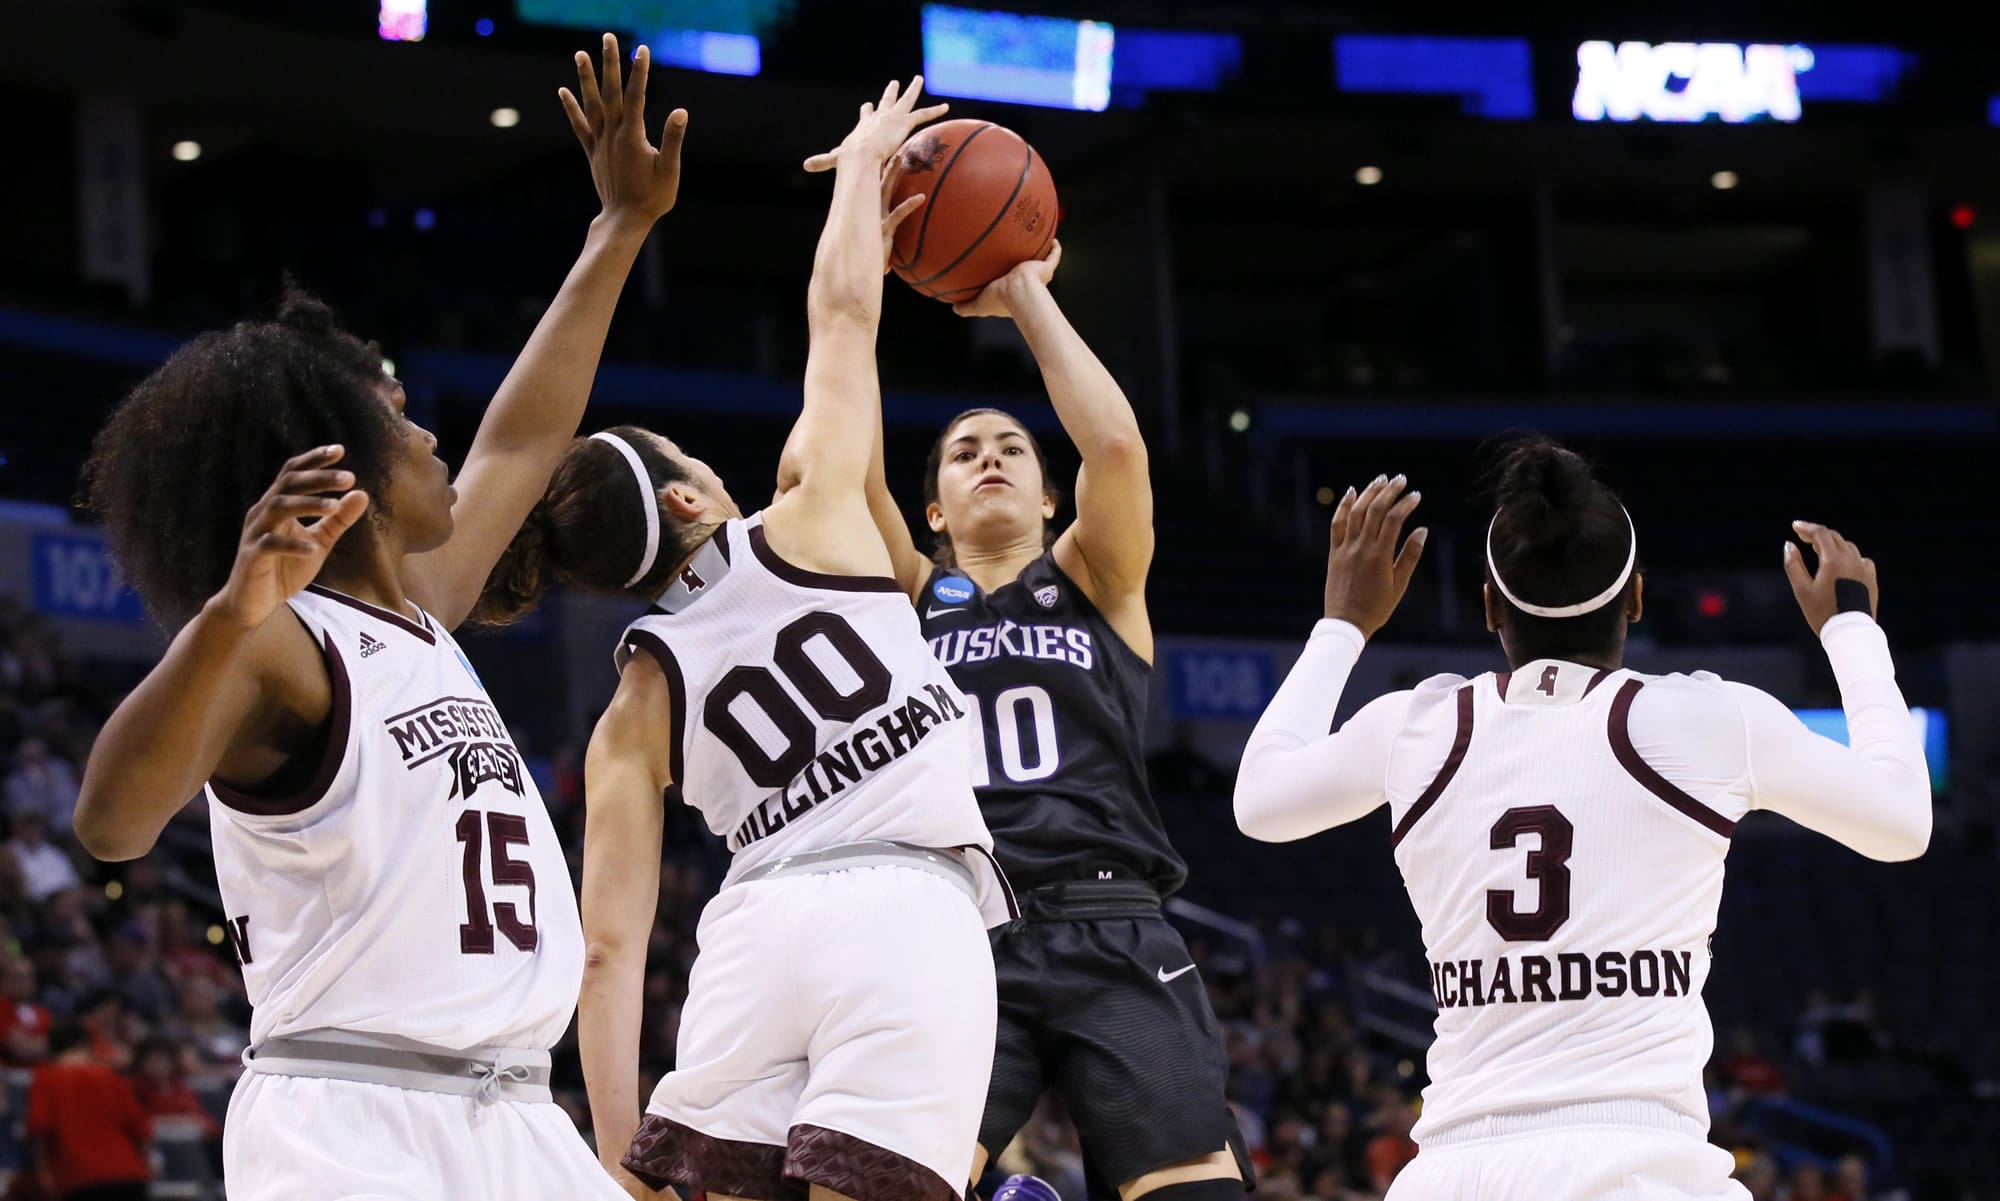 Washington guard Kelsey Plum (10) shoots over Mississippi State's Teaira McCowan (15), Dominique Dillingham (00) and Breanna Richardson (3) during the second half of a regional semifinal of the NCAA women's college basketball tournament, Friday, March 24, 2017, in Oklahoma City.